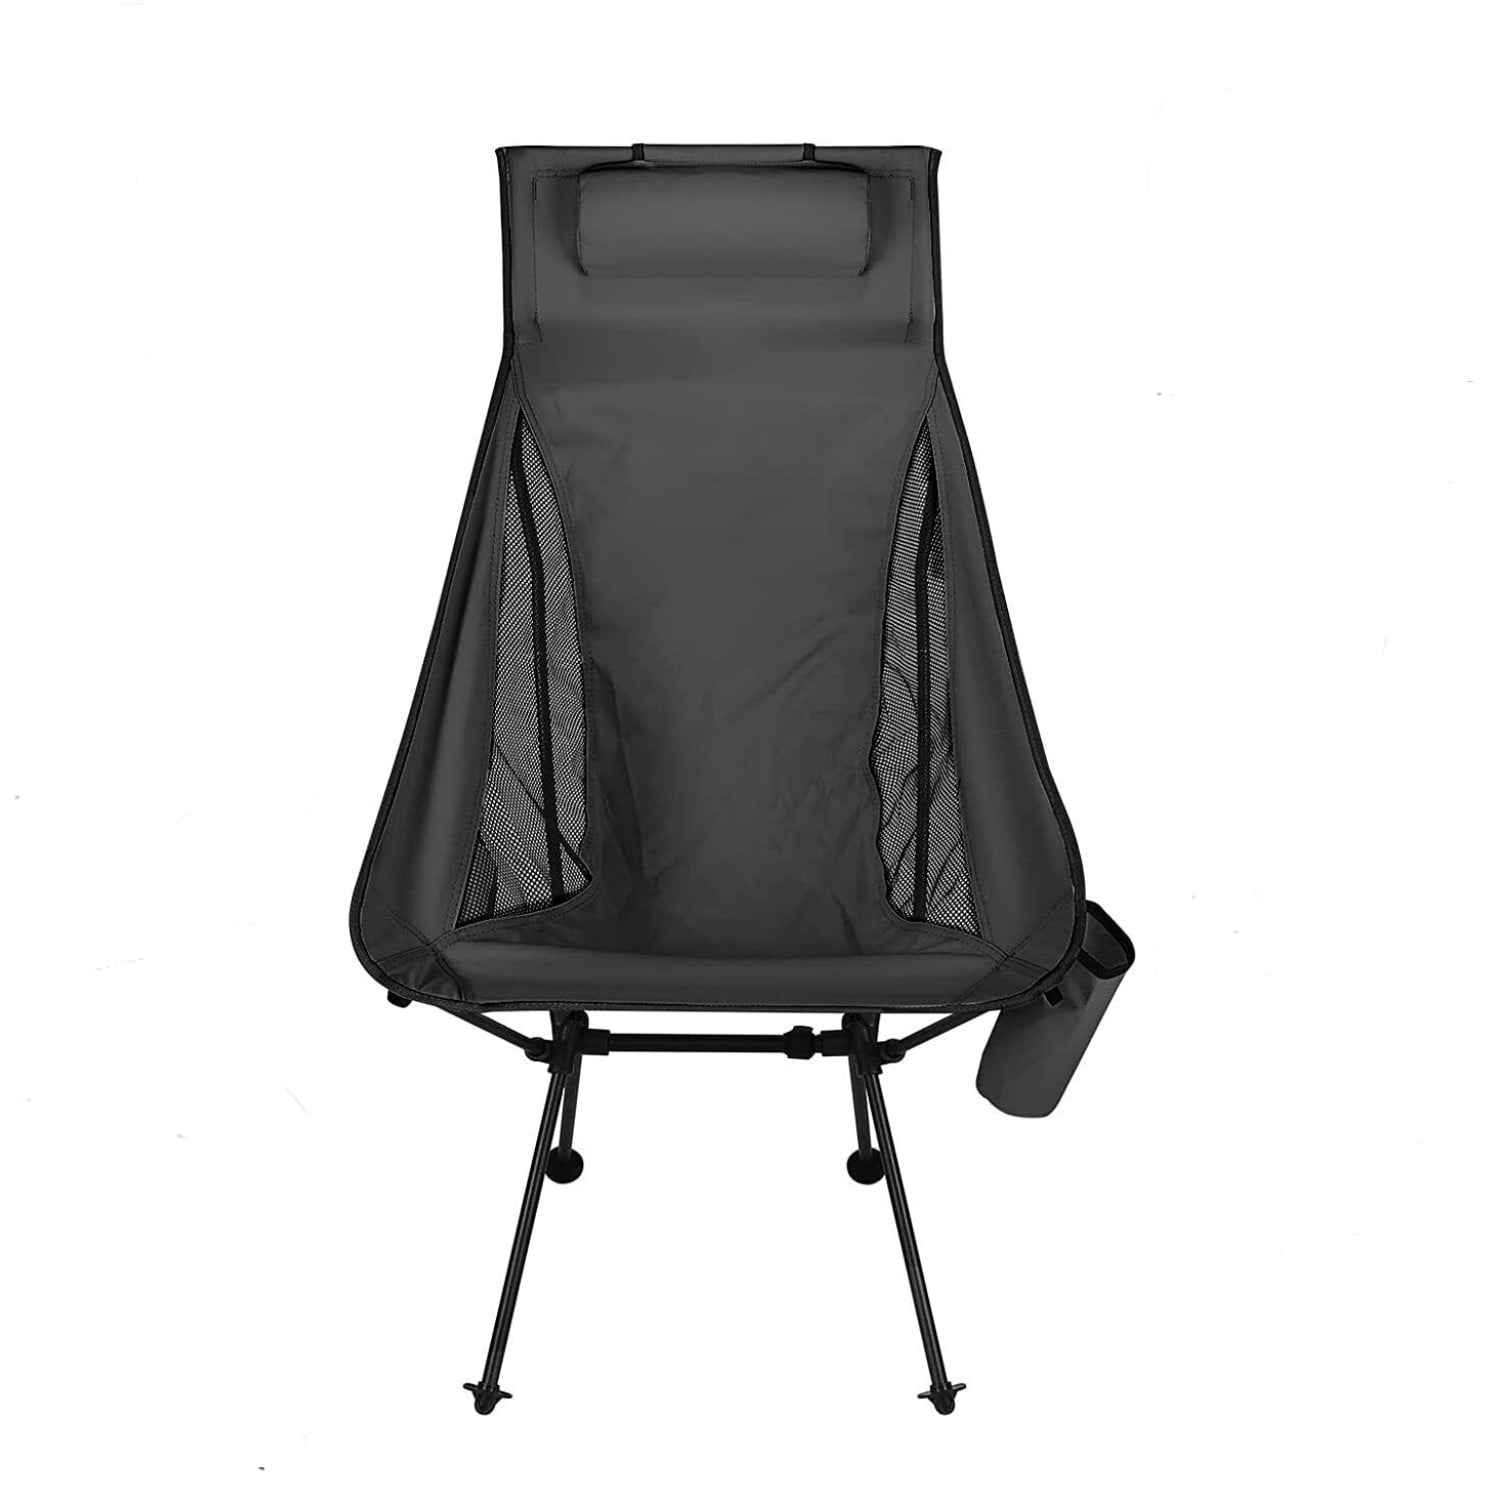 Portable Folding Camping Chairs, Heavy Duty Lawn Chair Support 300 ...